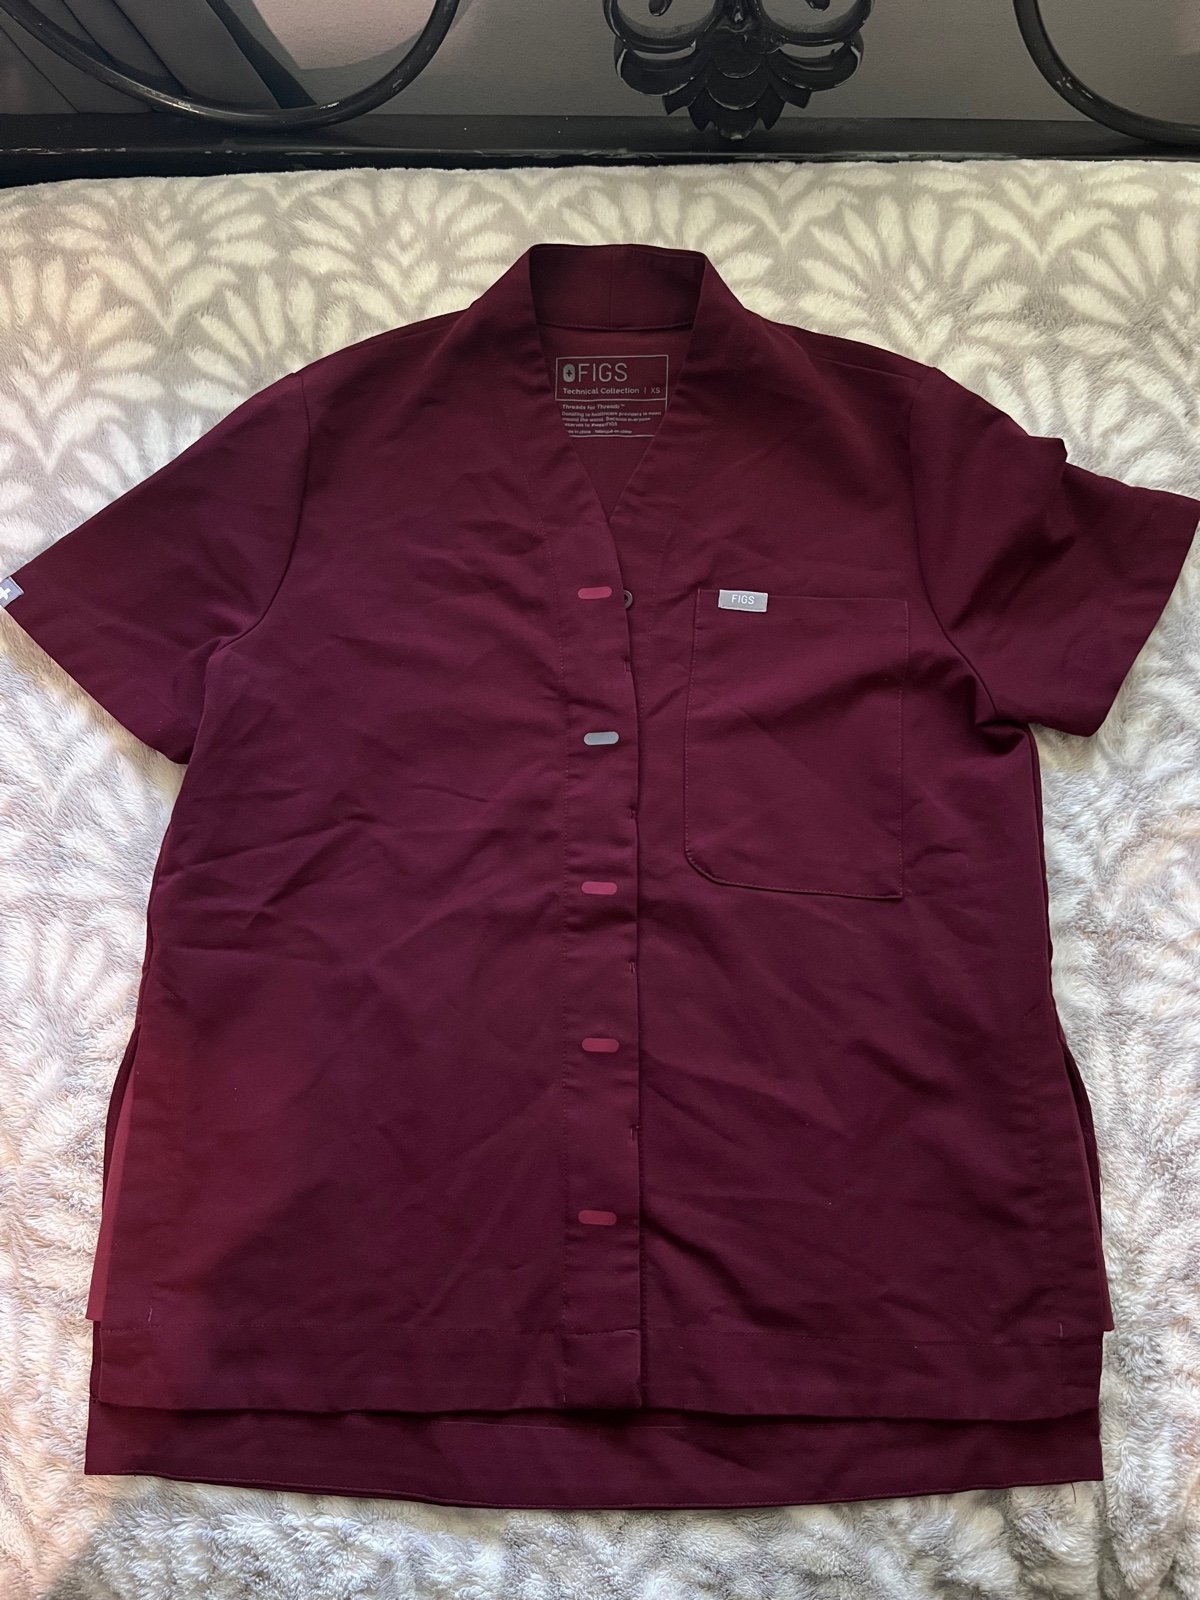 Simple FIGS Suswe Shawl Collar Scrub Top Maroon XS discontinued NwATiQ4V3 US Outlet